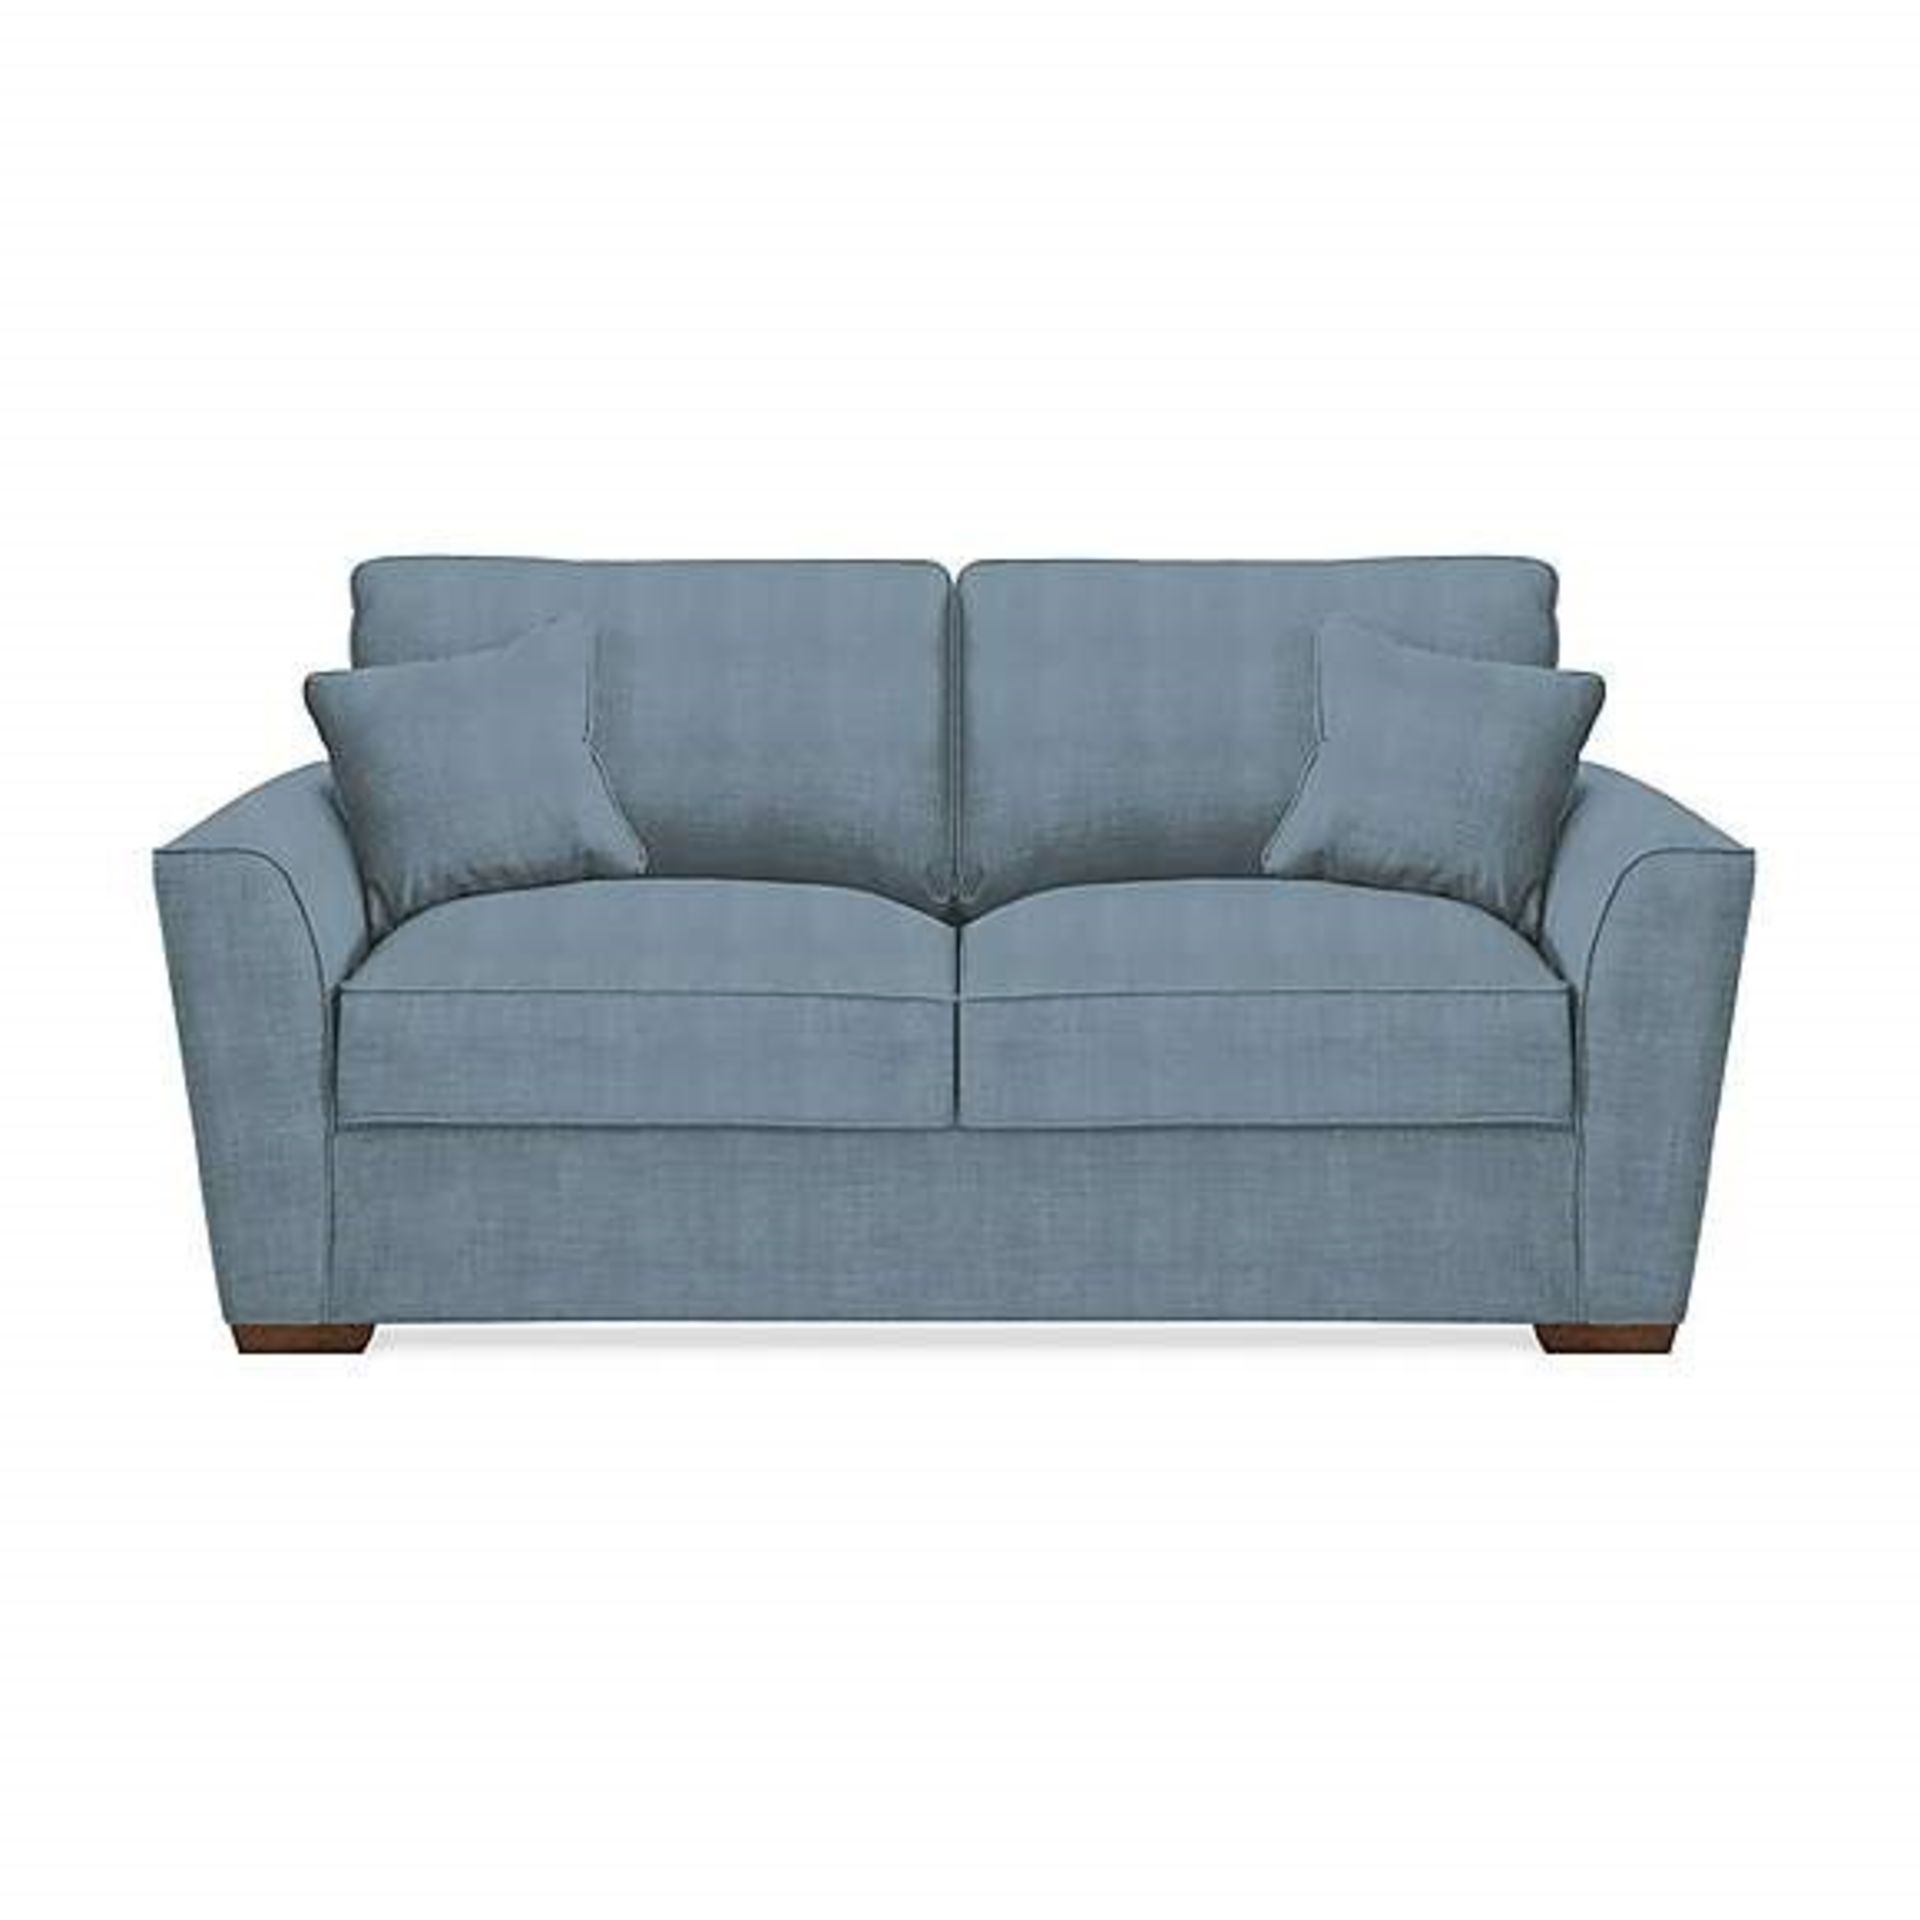 1 BRAND NEW BAGGED FABB SOFAS KINGSTON 3 SEATER SOFA IN NORFOLK TEAL (VIEWING HIGHLY RECOMMENDED)